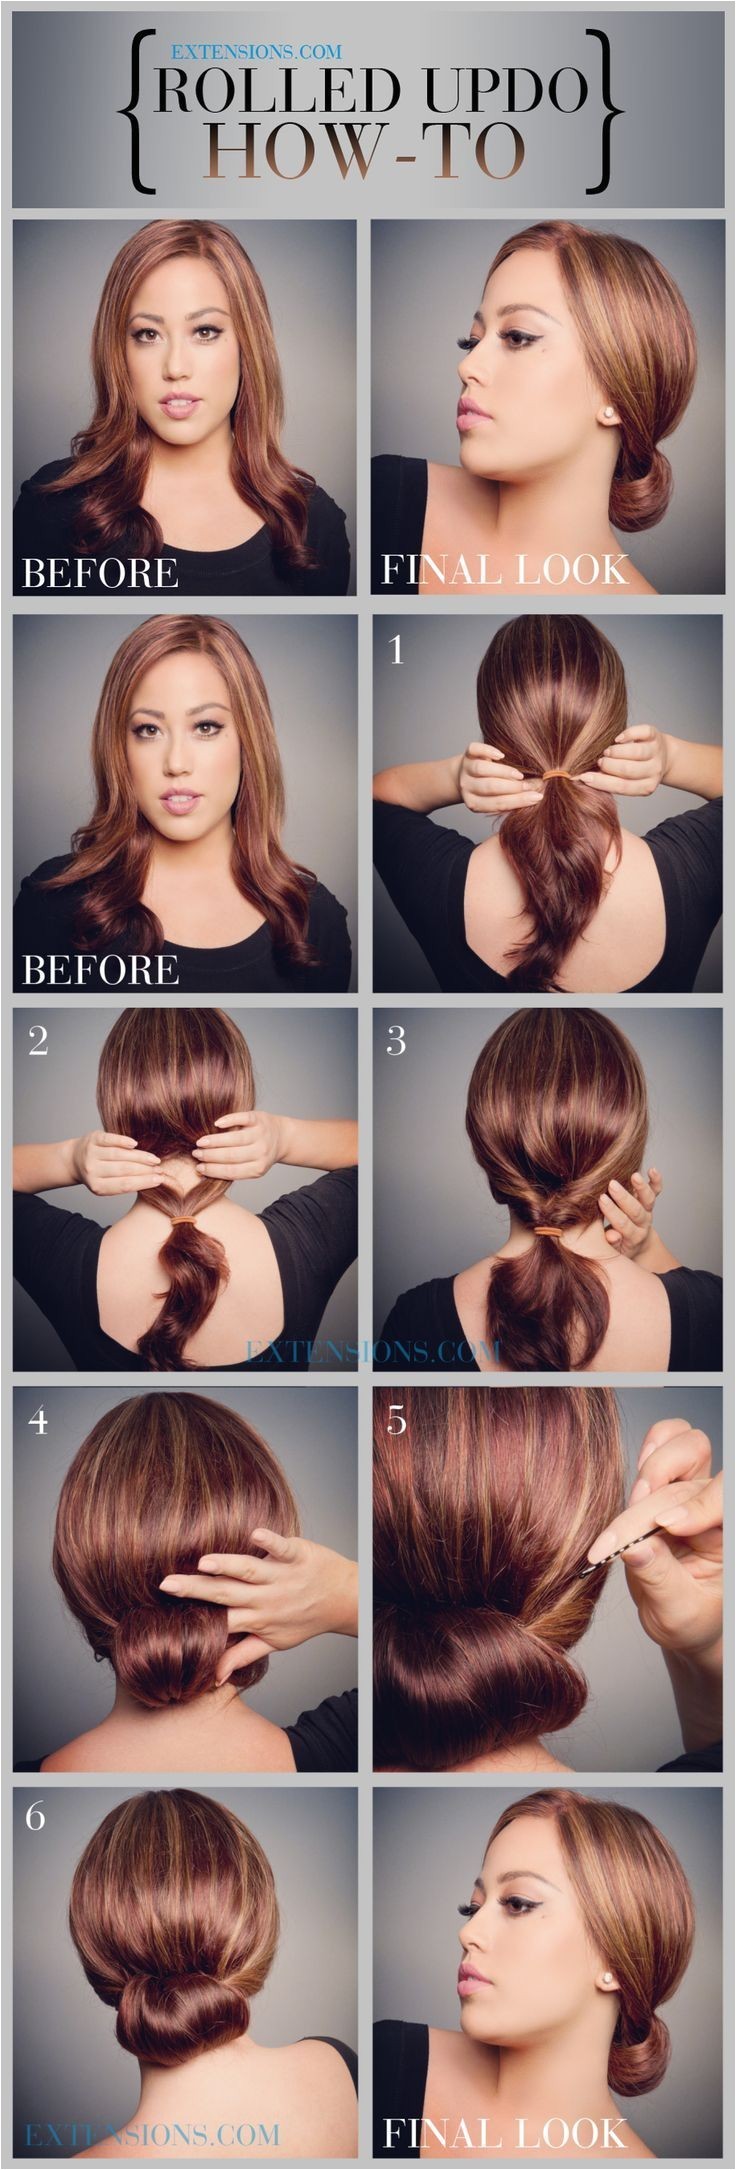 How to Do Easy Updo Hairstyles 12 Trendy Low Bun Updo Hairstyles Tutorials Easy Cute